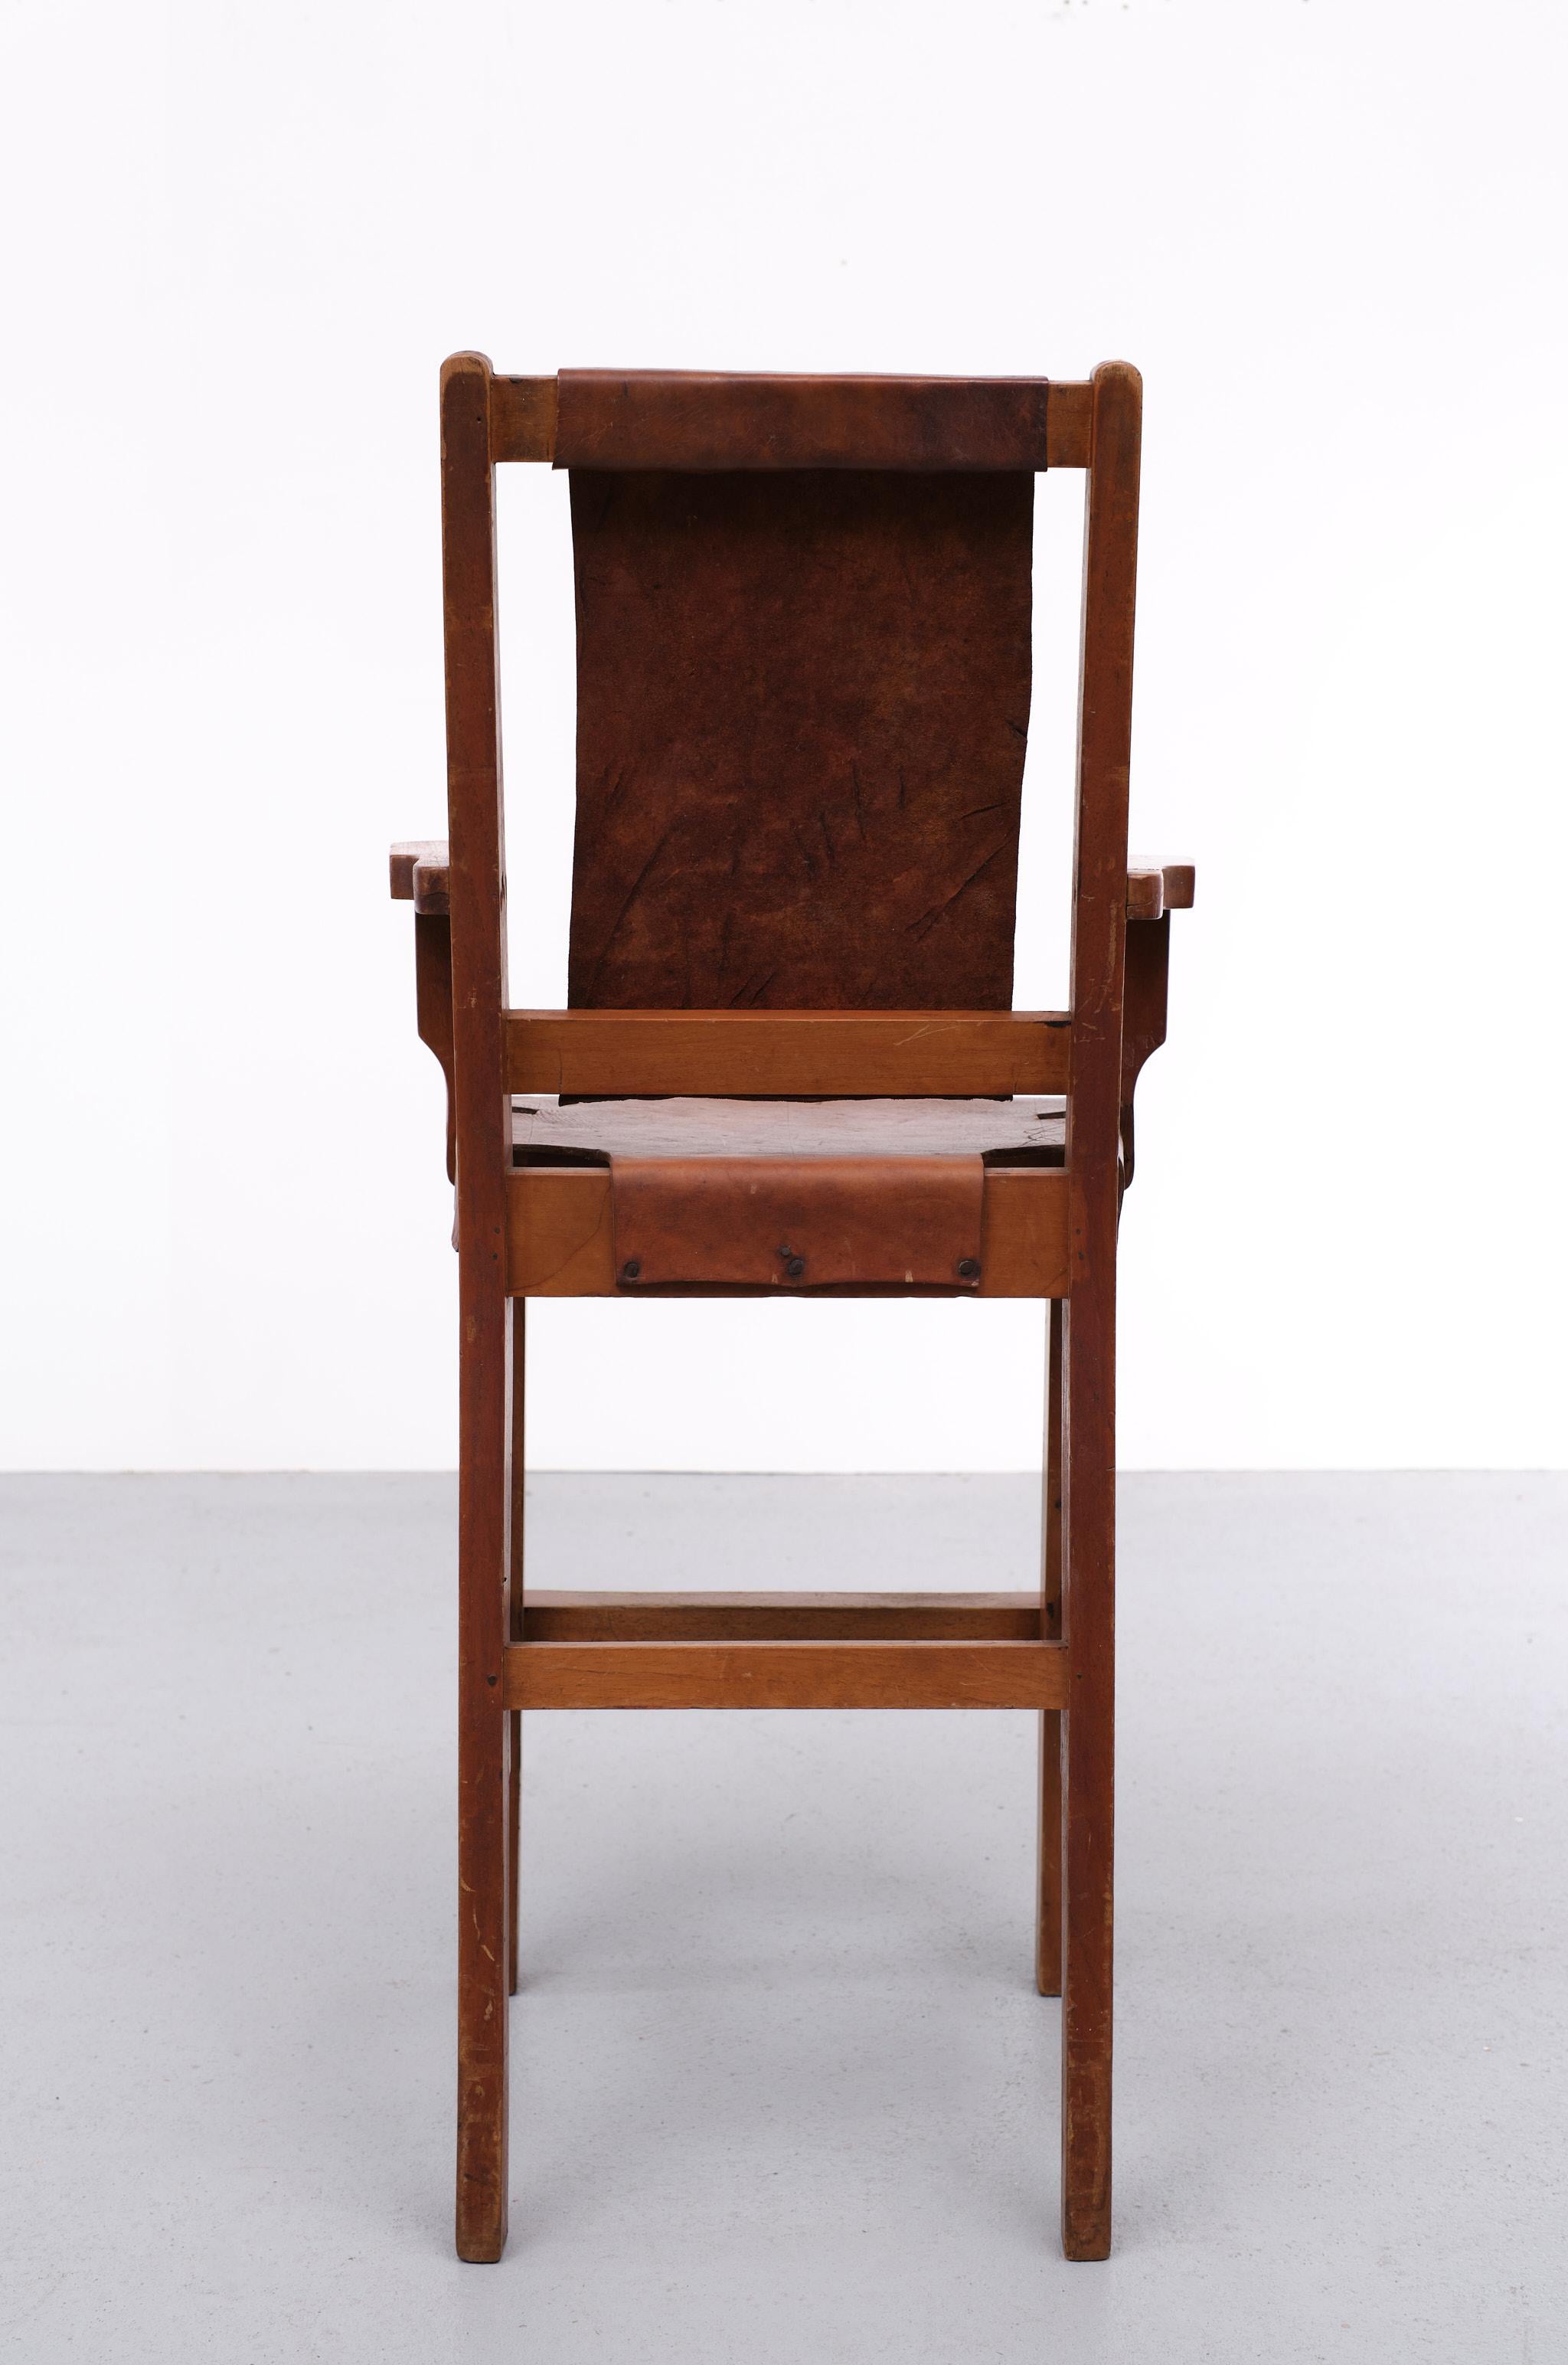 Mid-20th Century Modernist High Chair Gerrit Rietveld Style 1940s Dutch For Sale